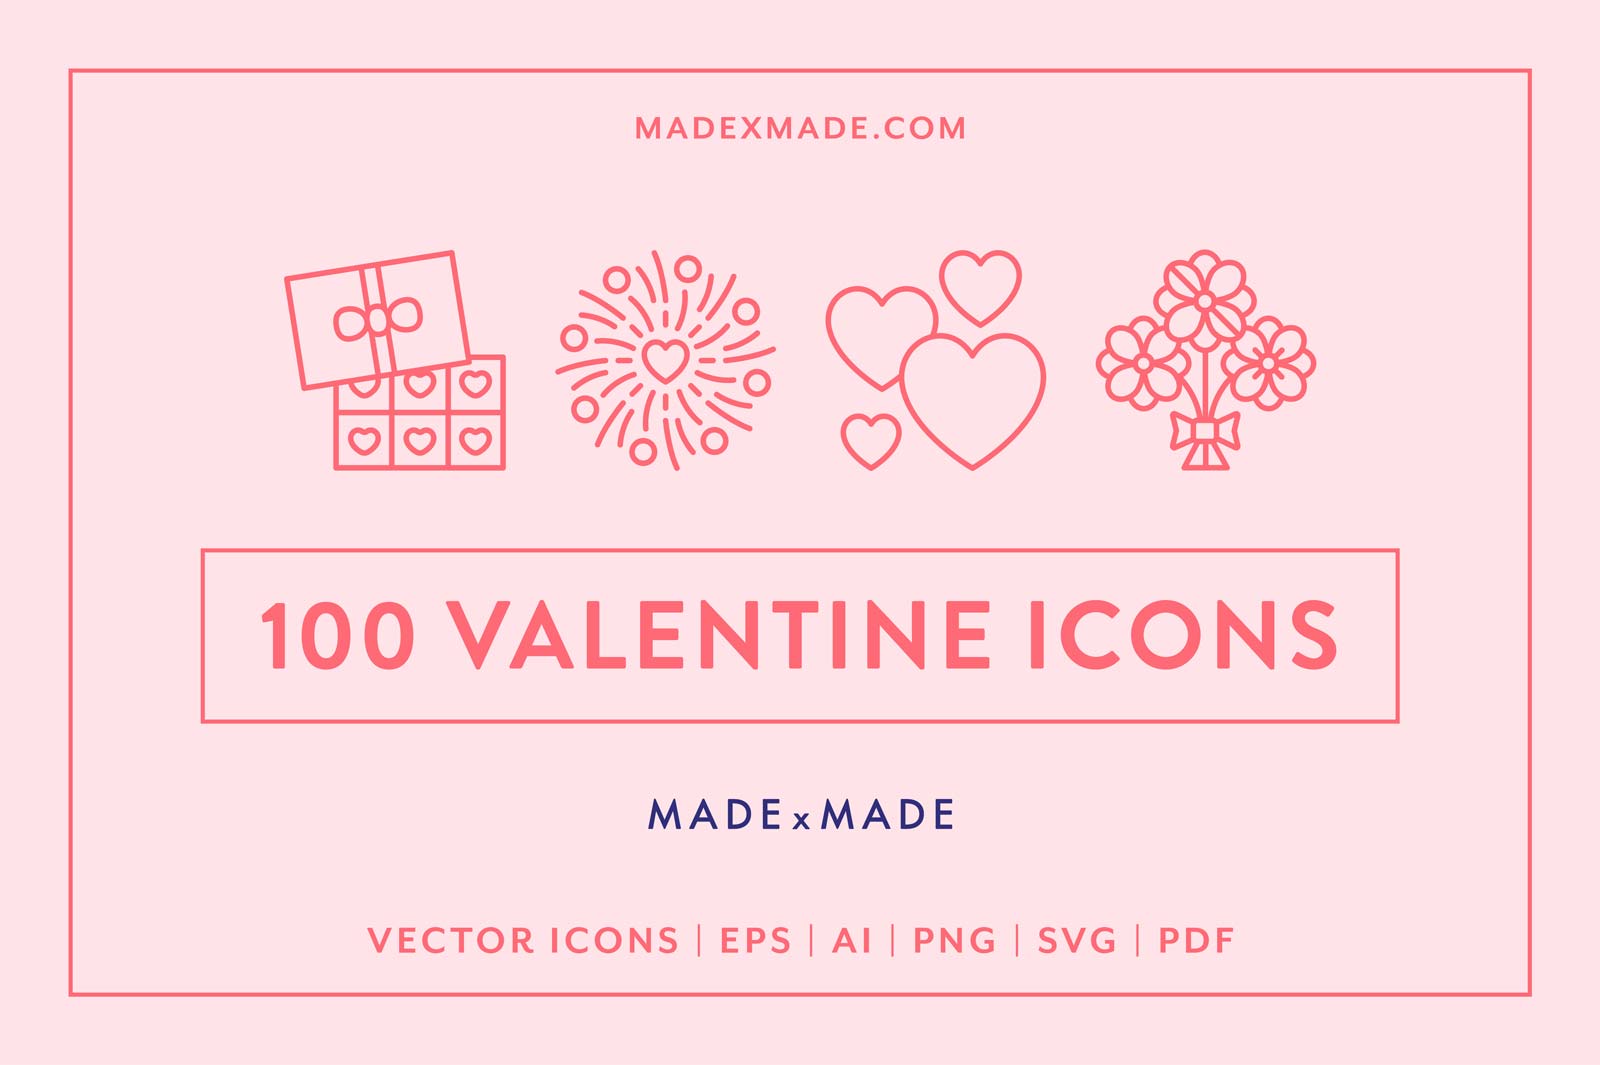 made x made icons valentines day